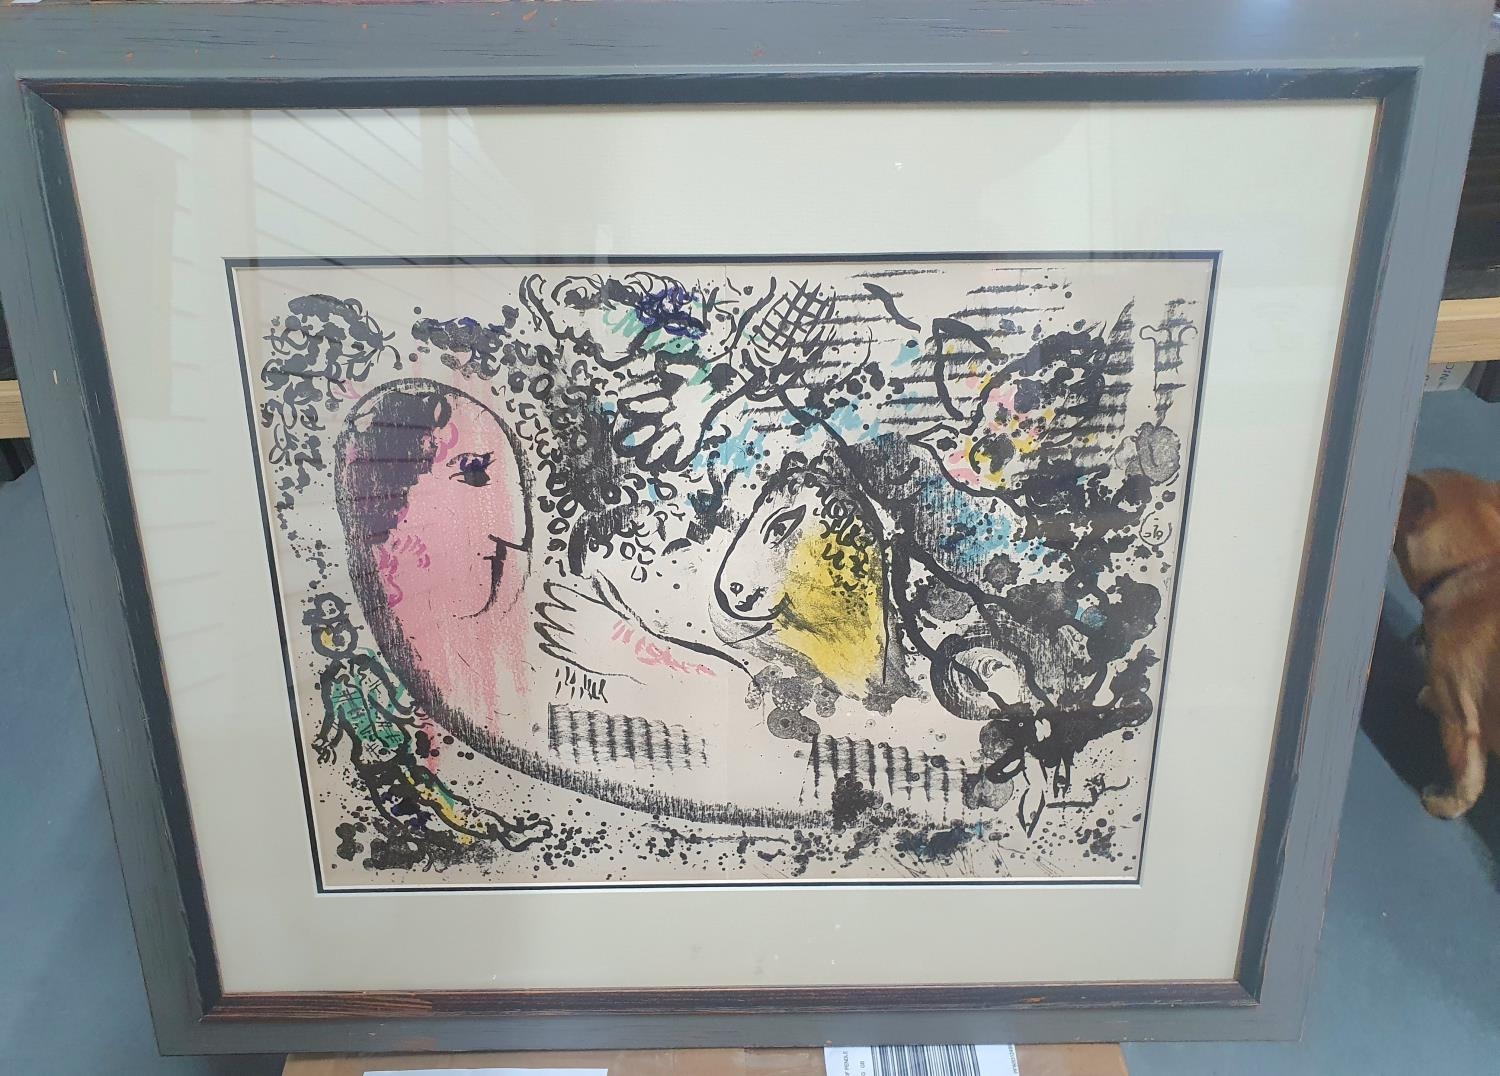 Marc Chagall (1887-1985), 'Reverie', lithograph in colours, framed, The lithograph measures 31 x